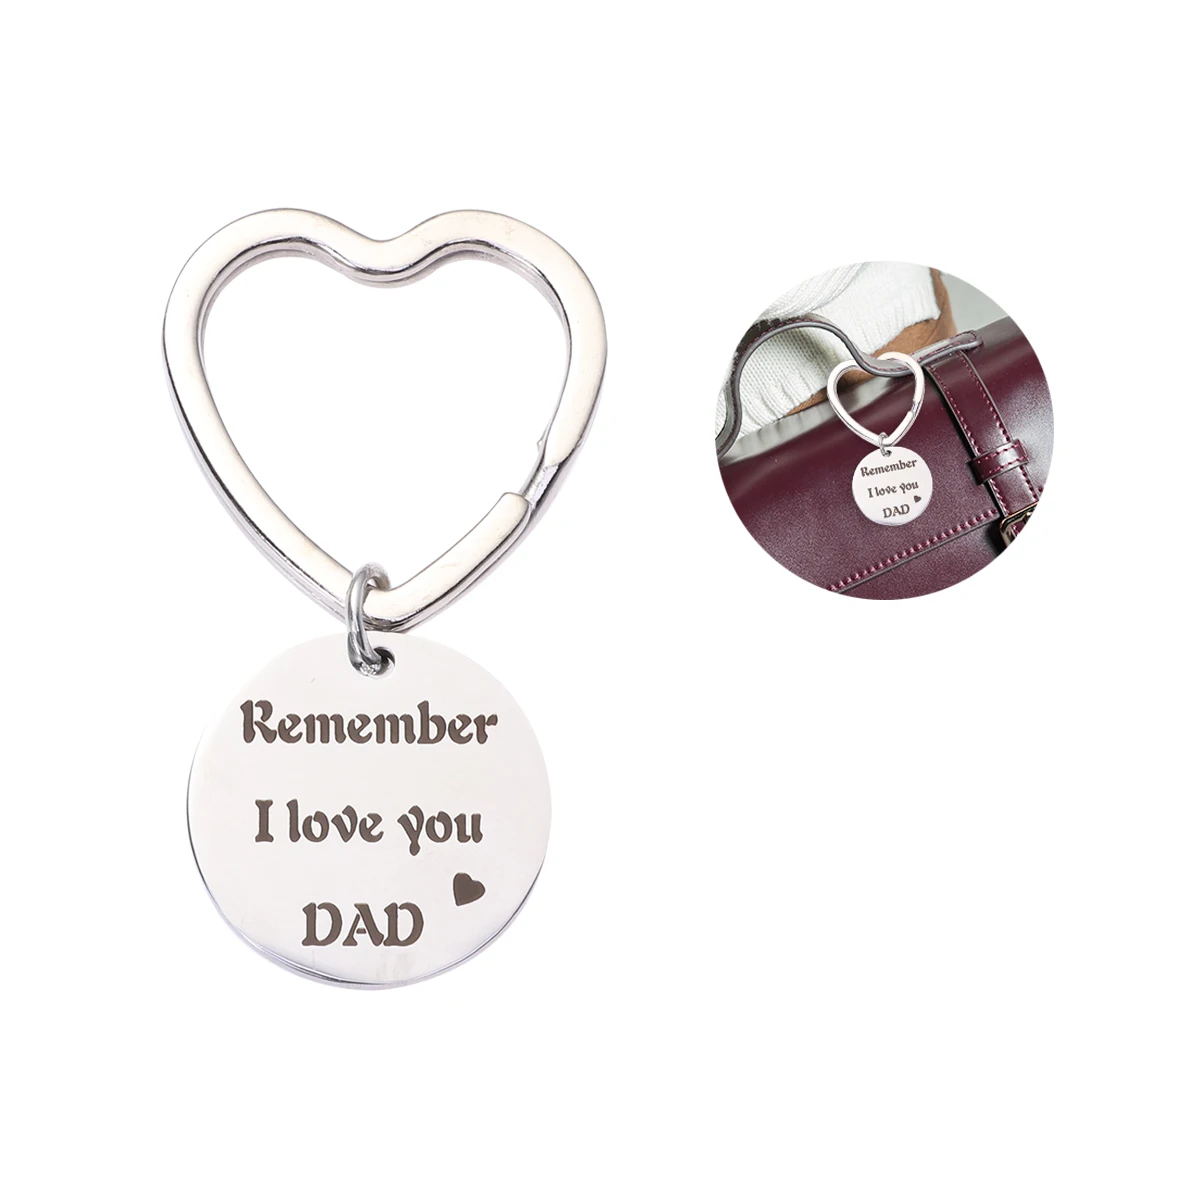 1pc Father'S Day Gifts Hanging Keyring KeyChain For Father Dad Mom Keyrings Drop Key Ring Chain Men Male Man | Автомобили и